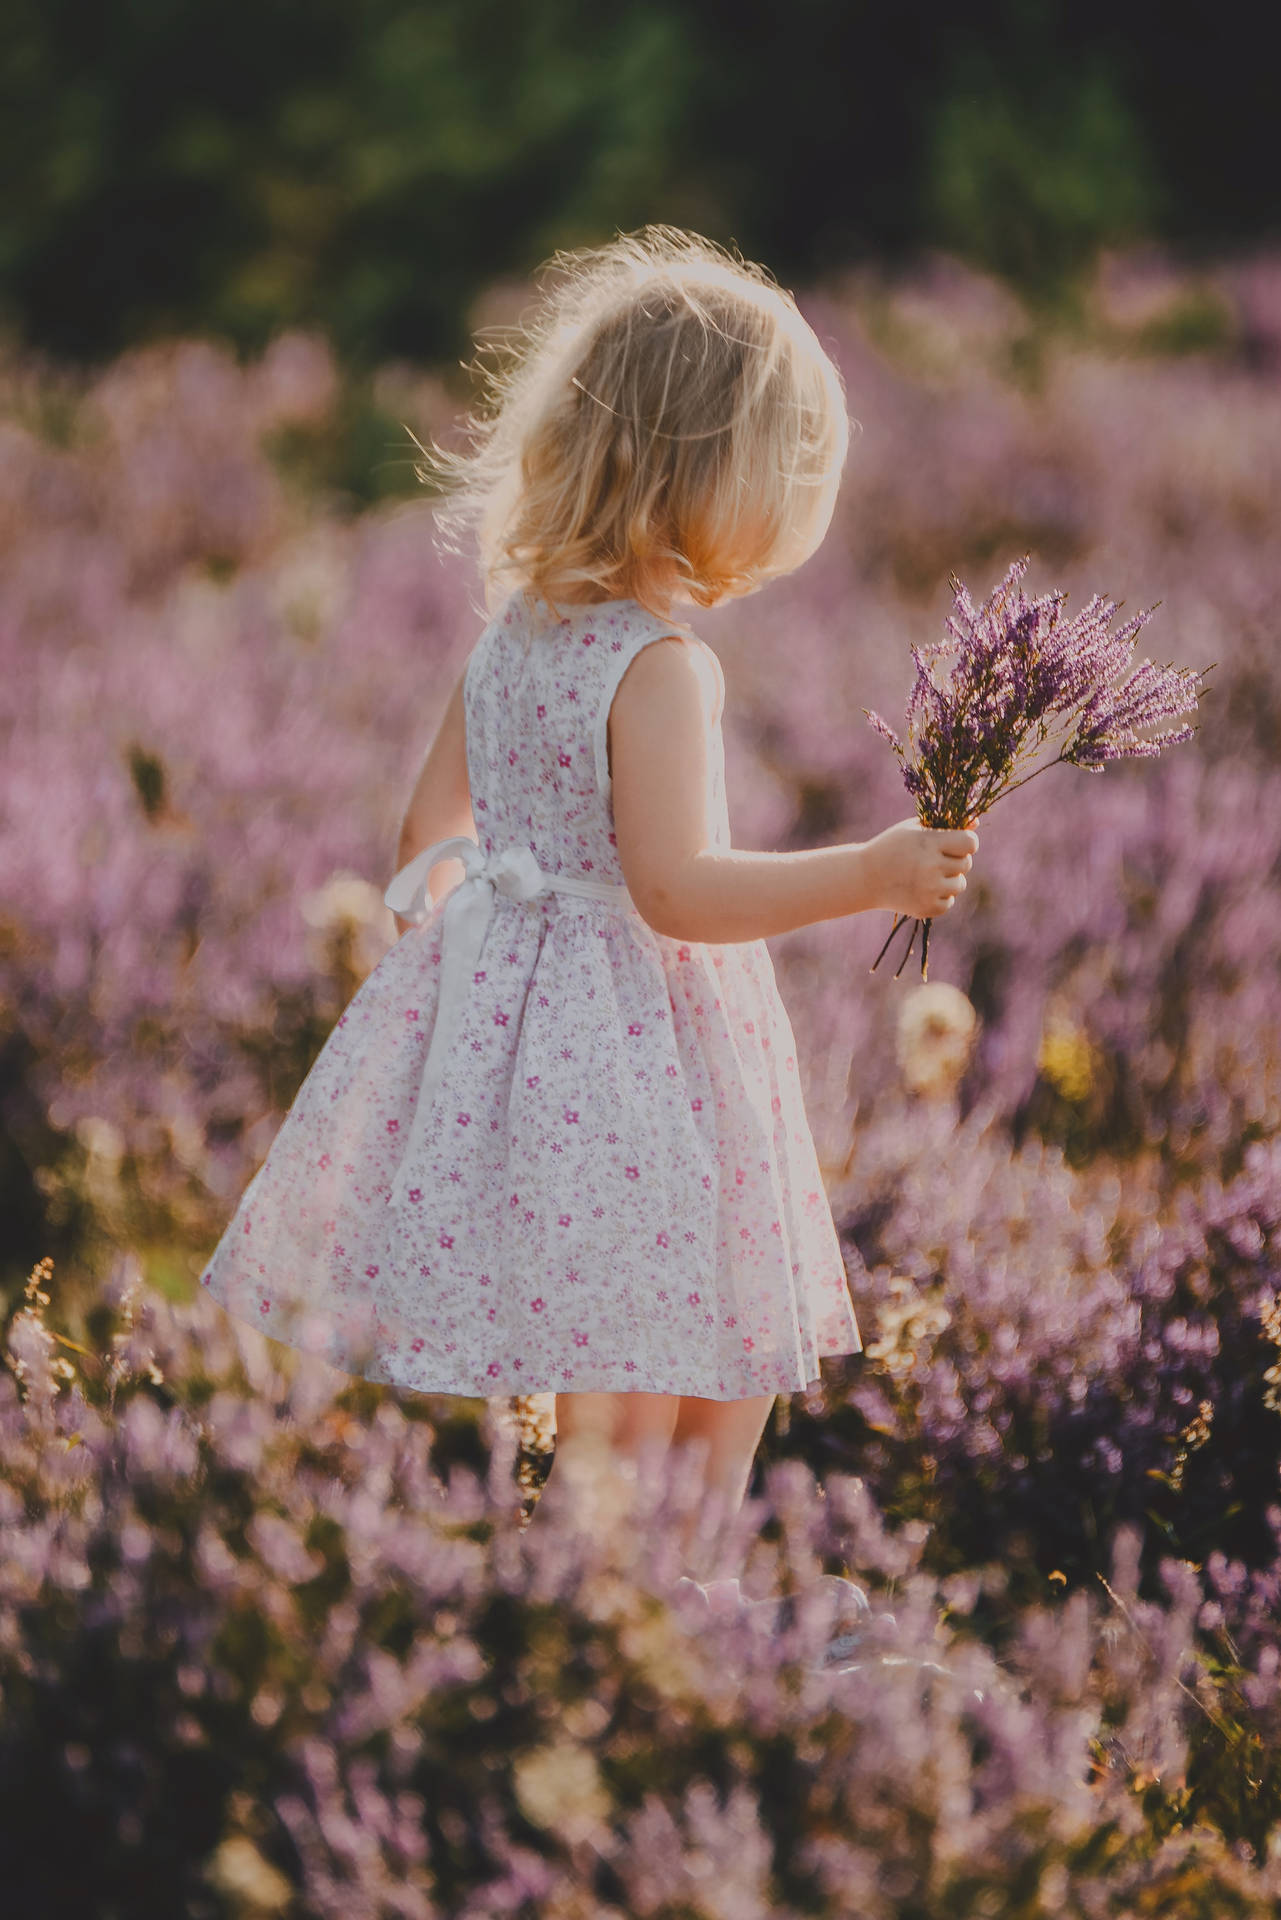 A smiling little girl admires her beautiful bouquet of lavender. Wallpaper